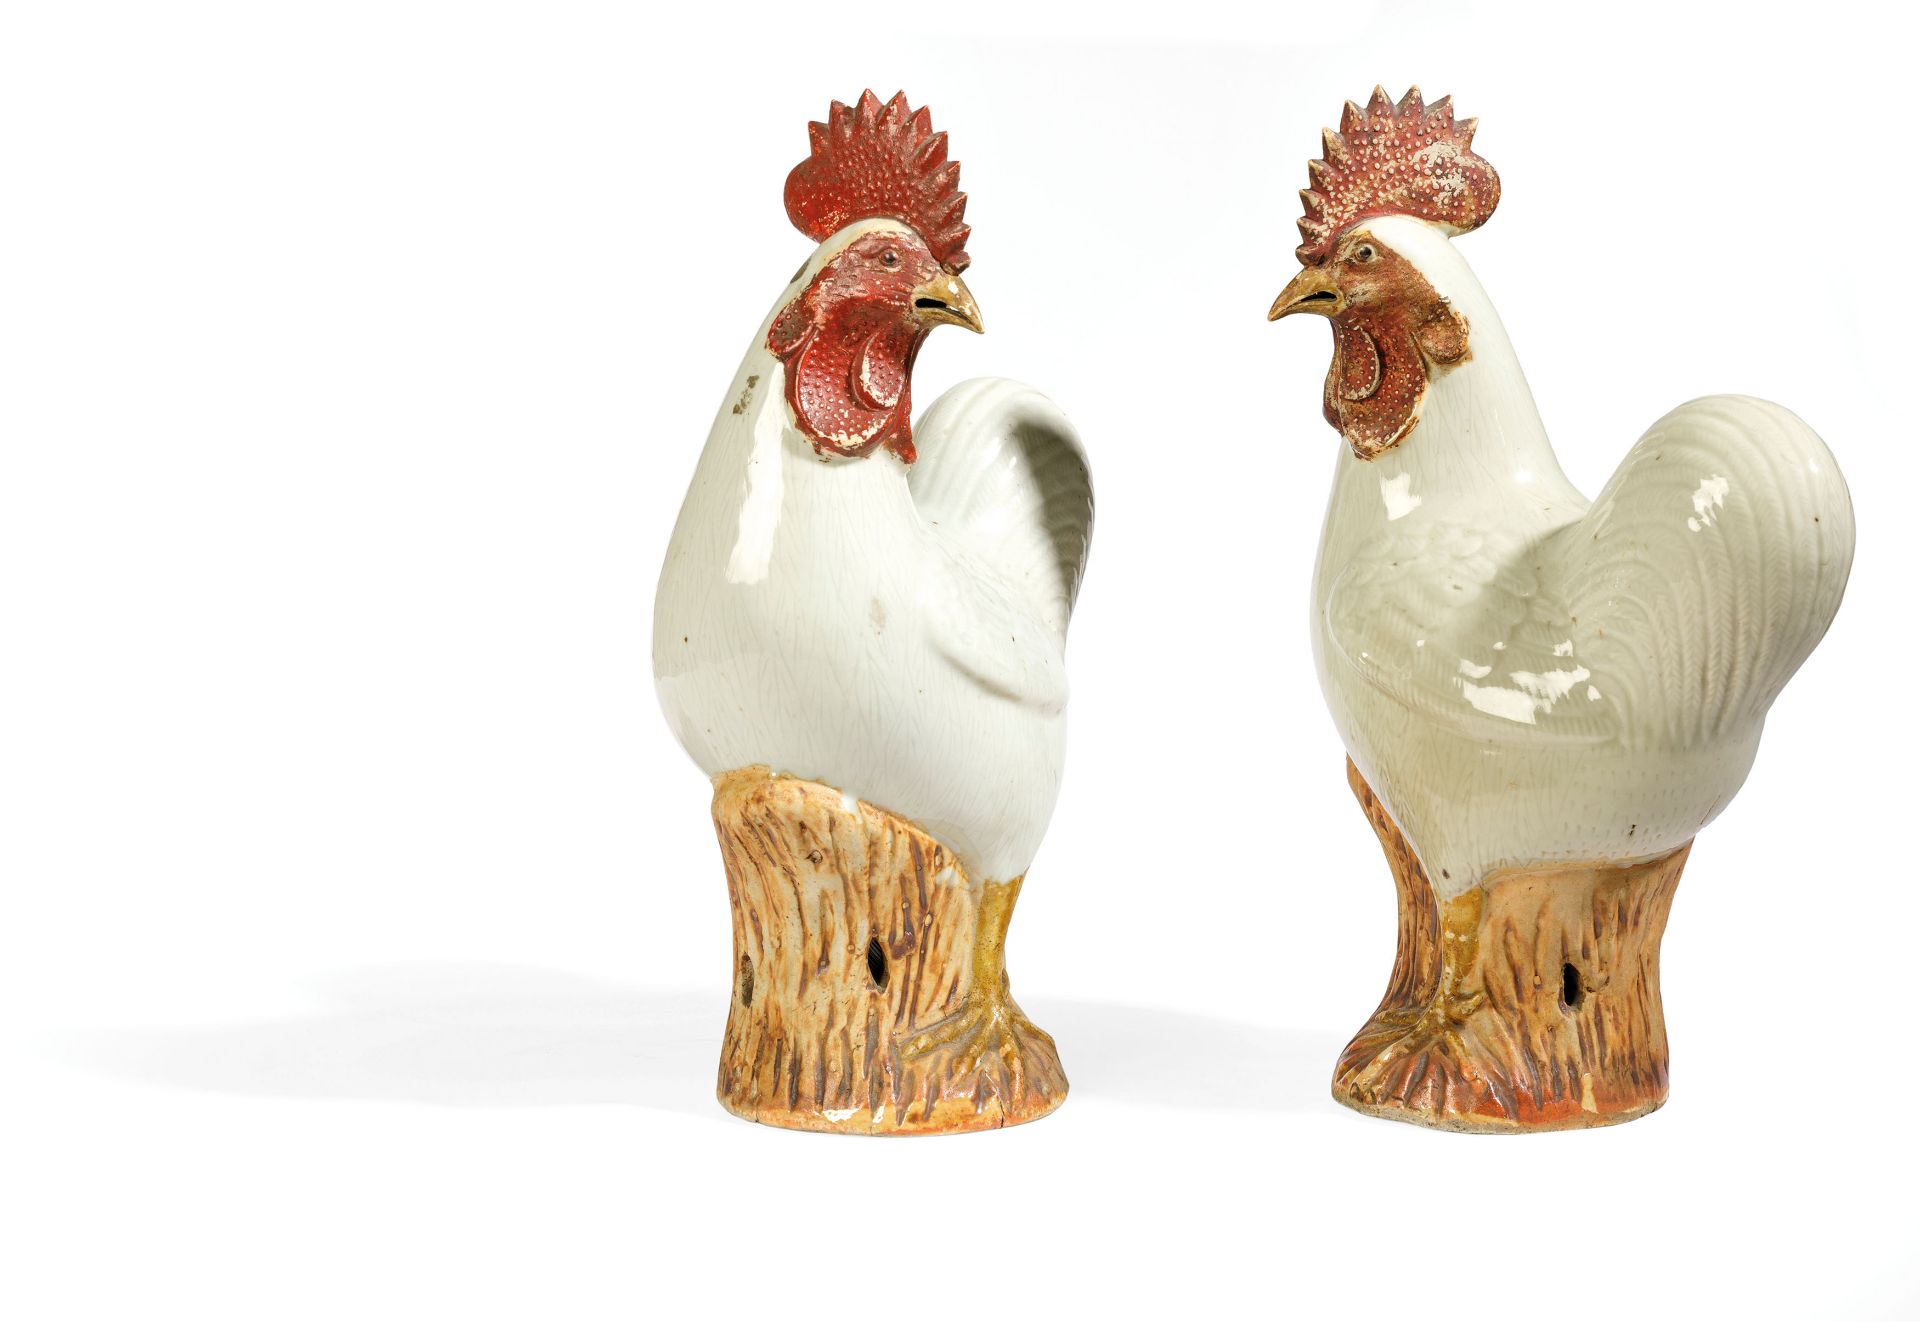 TWO PORCELAIN FIGURES OF STANDING COCKS, CHINA, 18TH-19TH CENTURY (2)